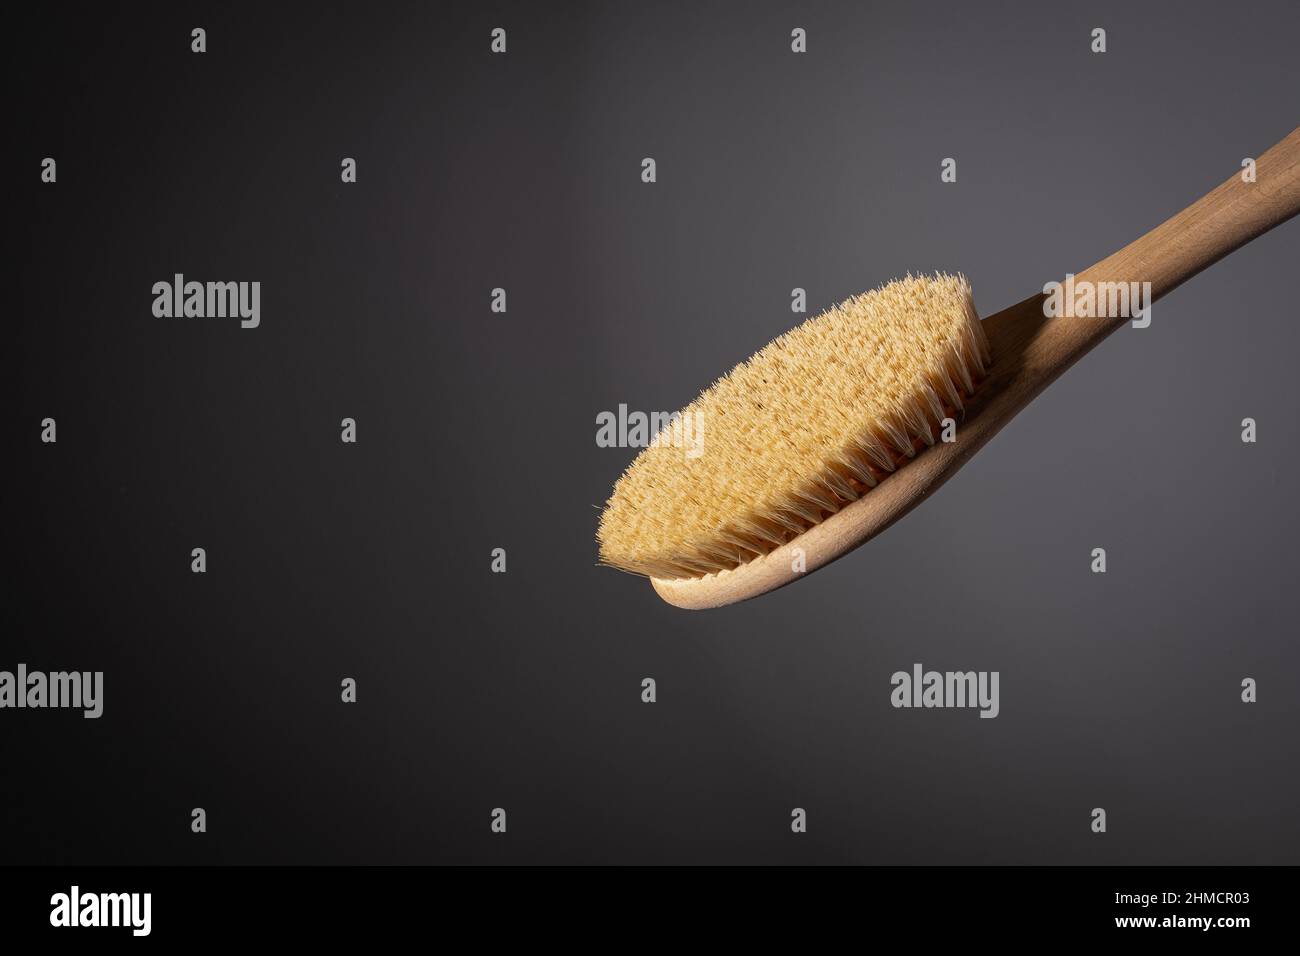 wooden brush for body dry massage anti cellulite peeling body care. on dark background Close-up Stock Photo